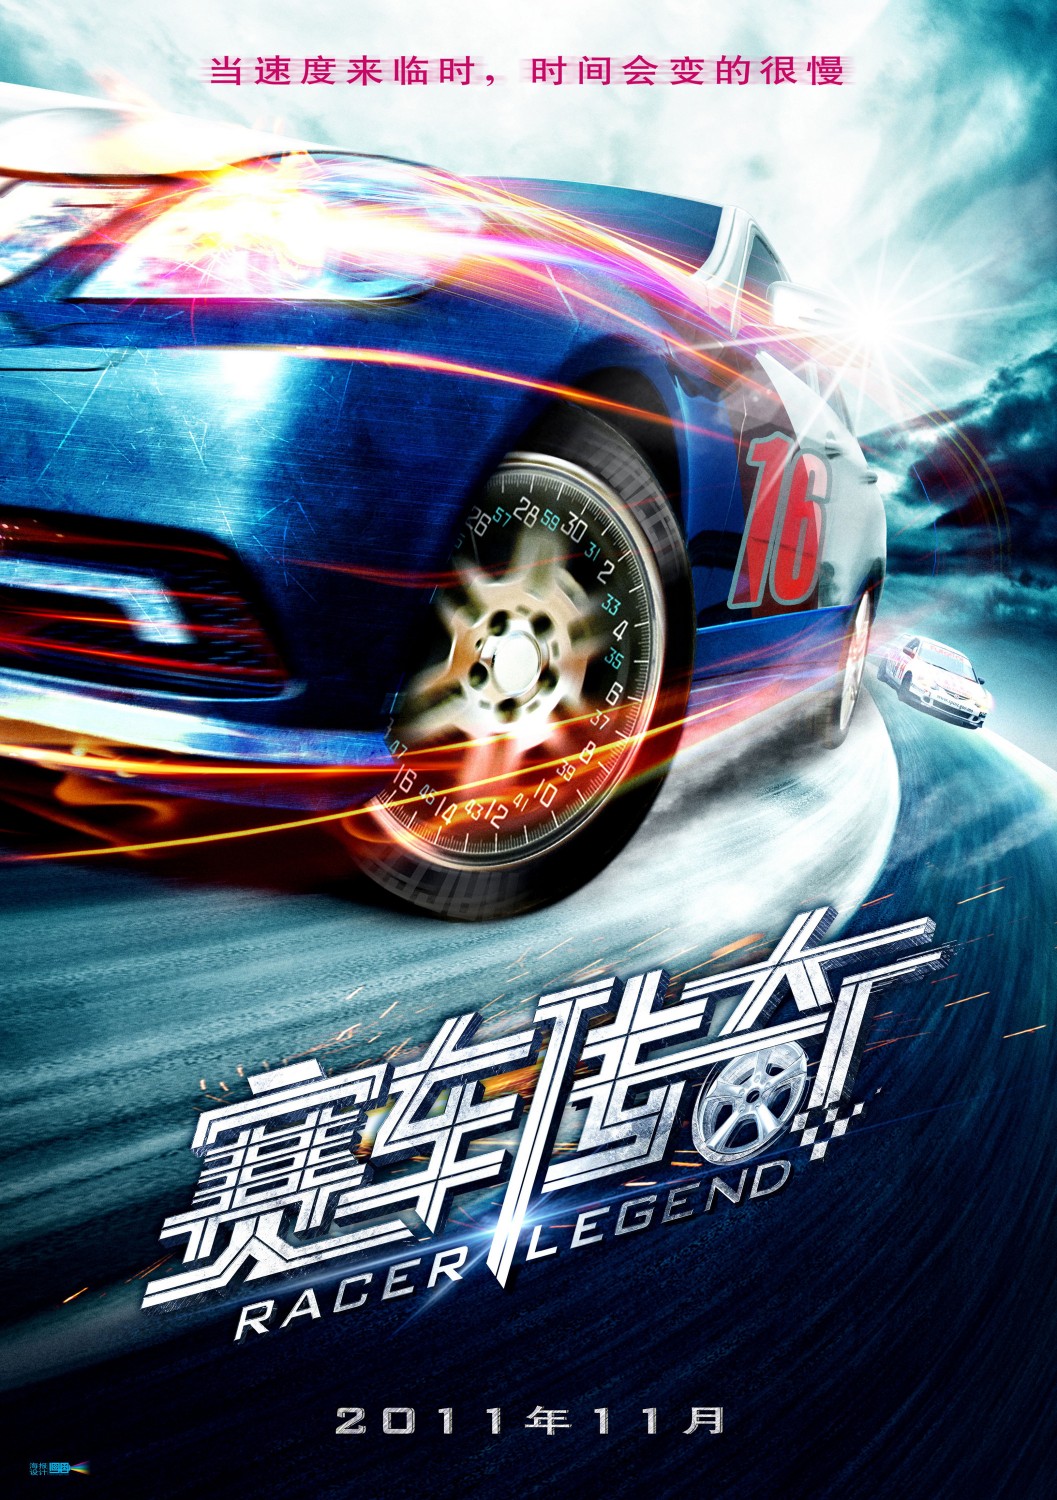 Extra Large Movie Poster Image for Racer Legend (#1 of 3)